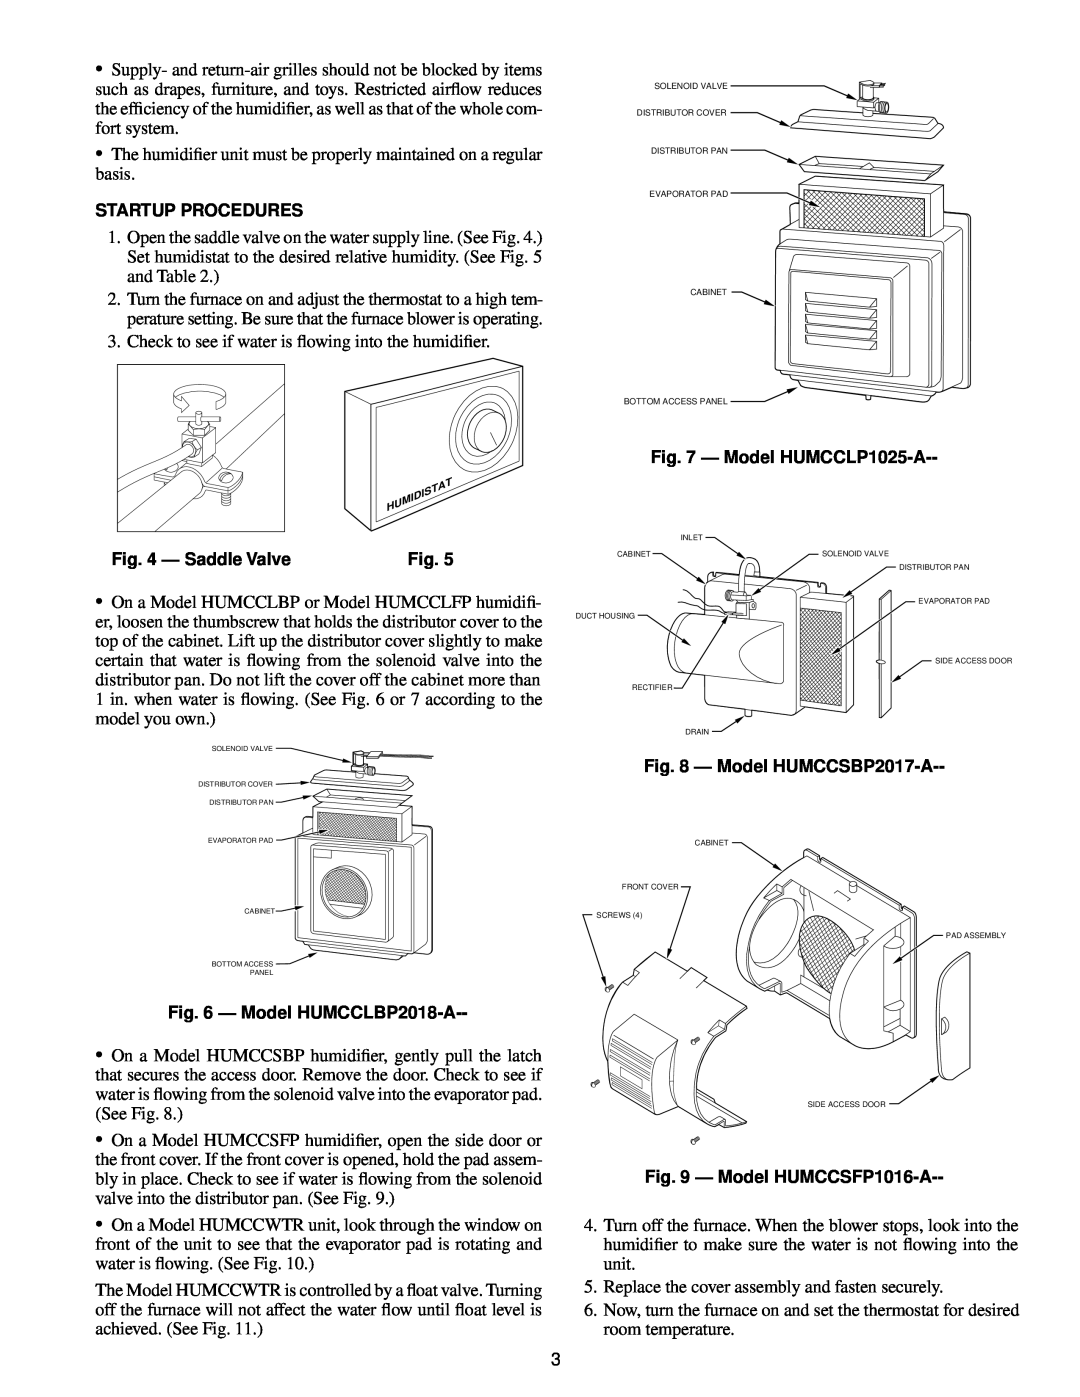 Carrier HUMCCWTR2019, HUMCCLFP1025, HUMCCSFP1016 The humidiﬁer unit must be properly maintained on a regular basis 